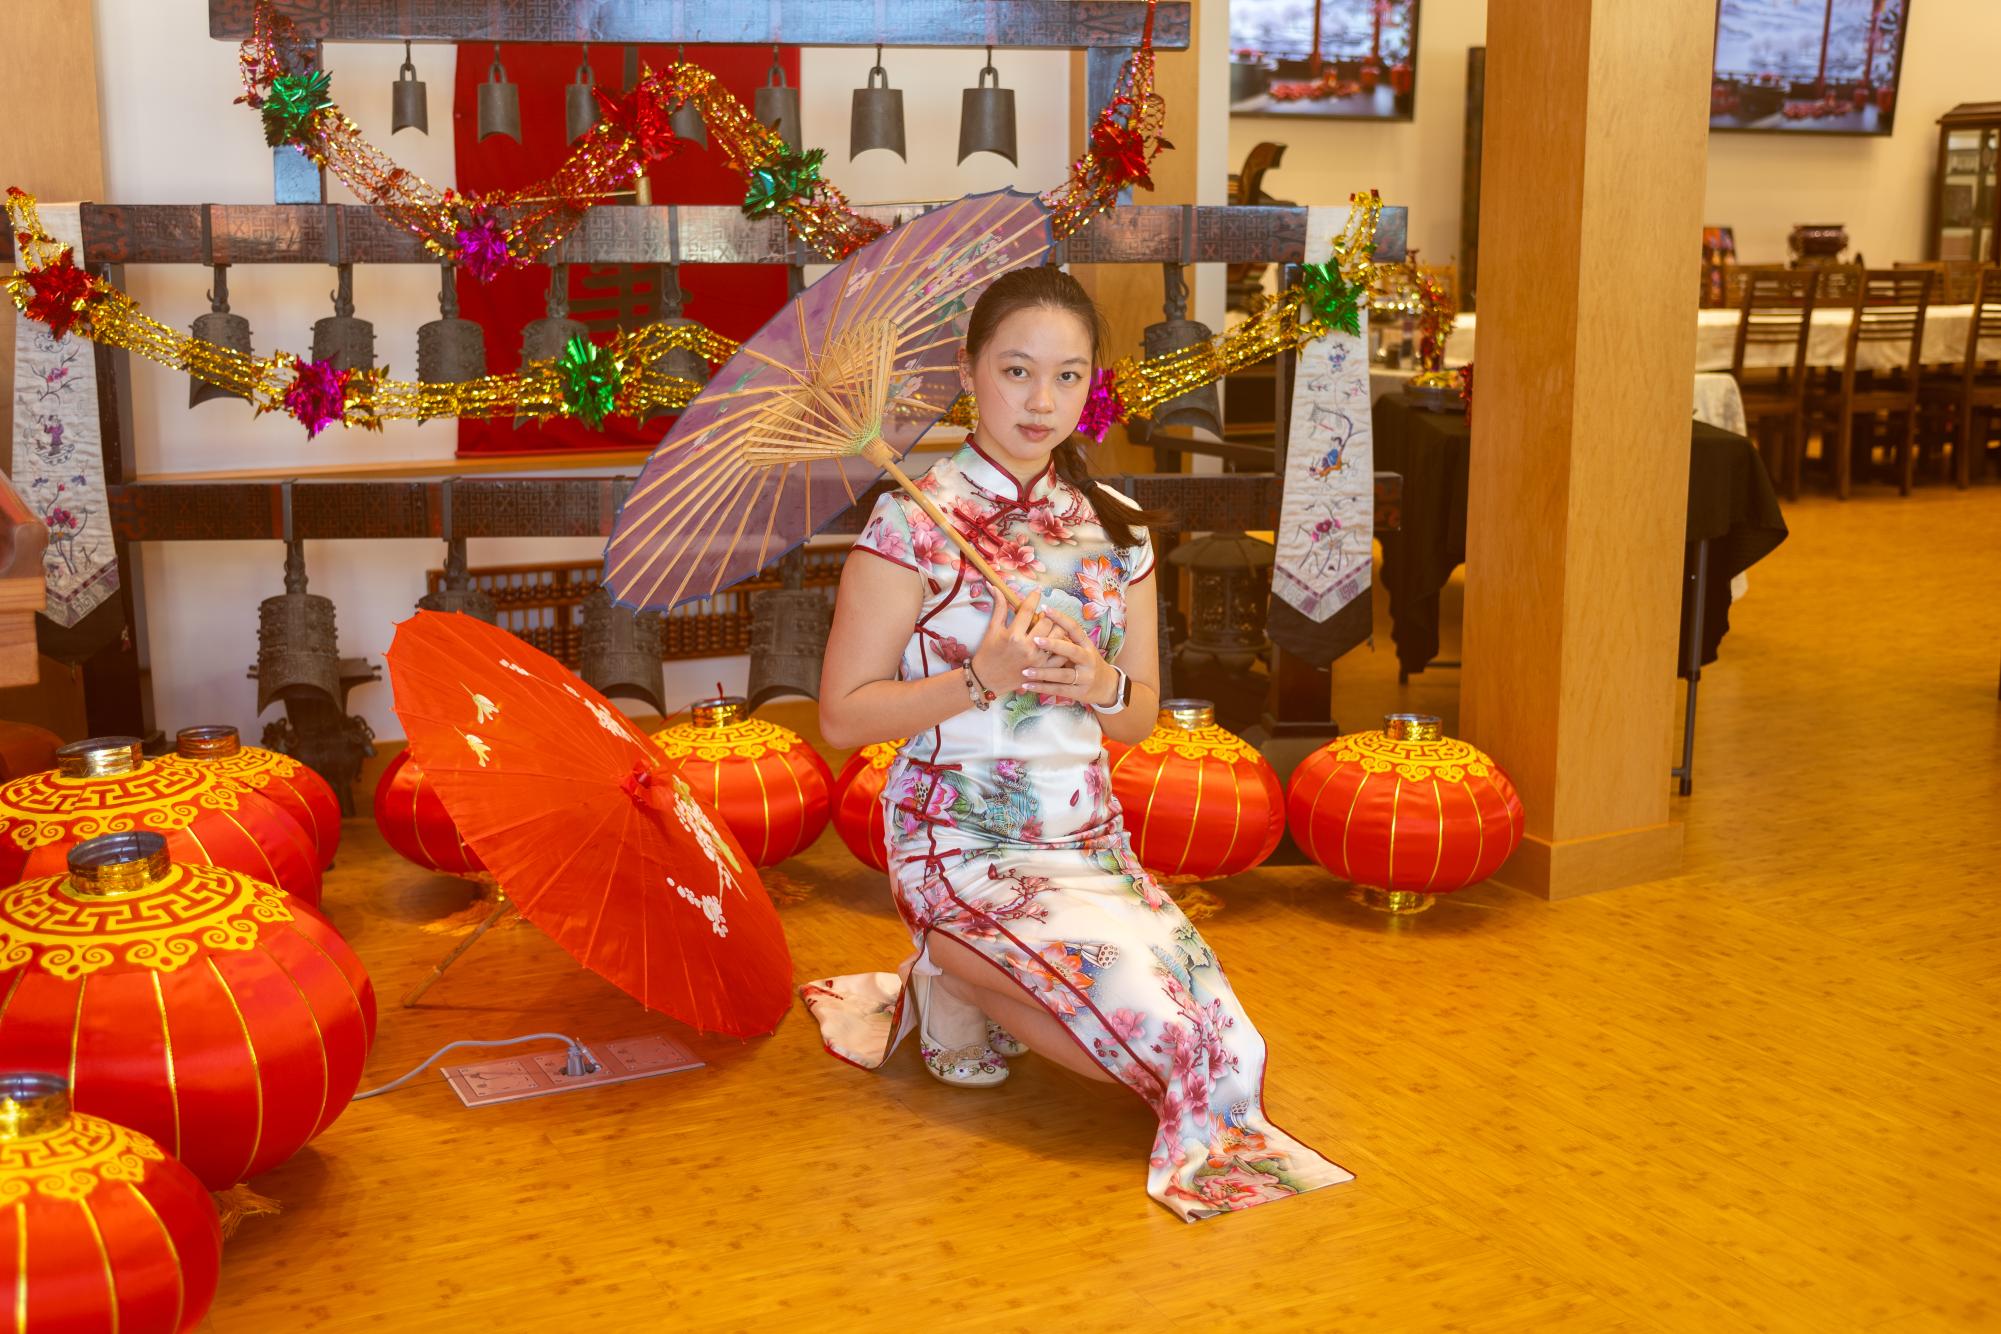 Isabella Peng poses in a traditional Chinese gown during the Lunar New Year celebration event at the Chinese Cultural Center on Tuesday, Feb. 13.